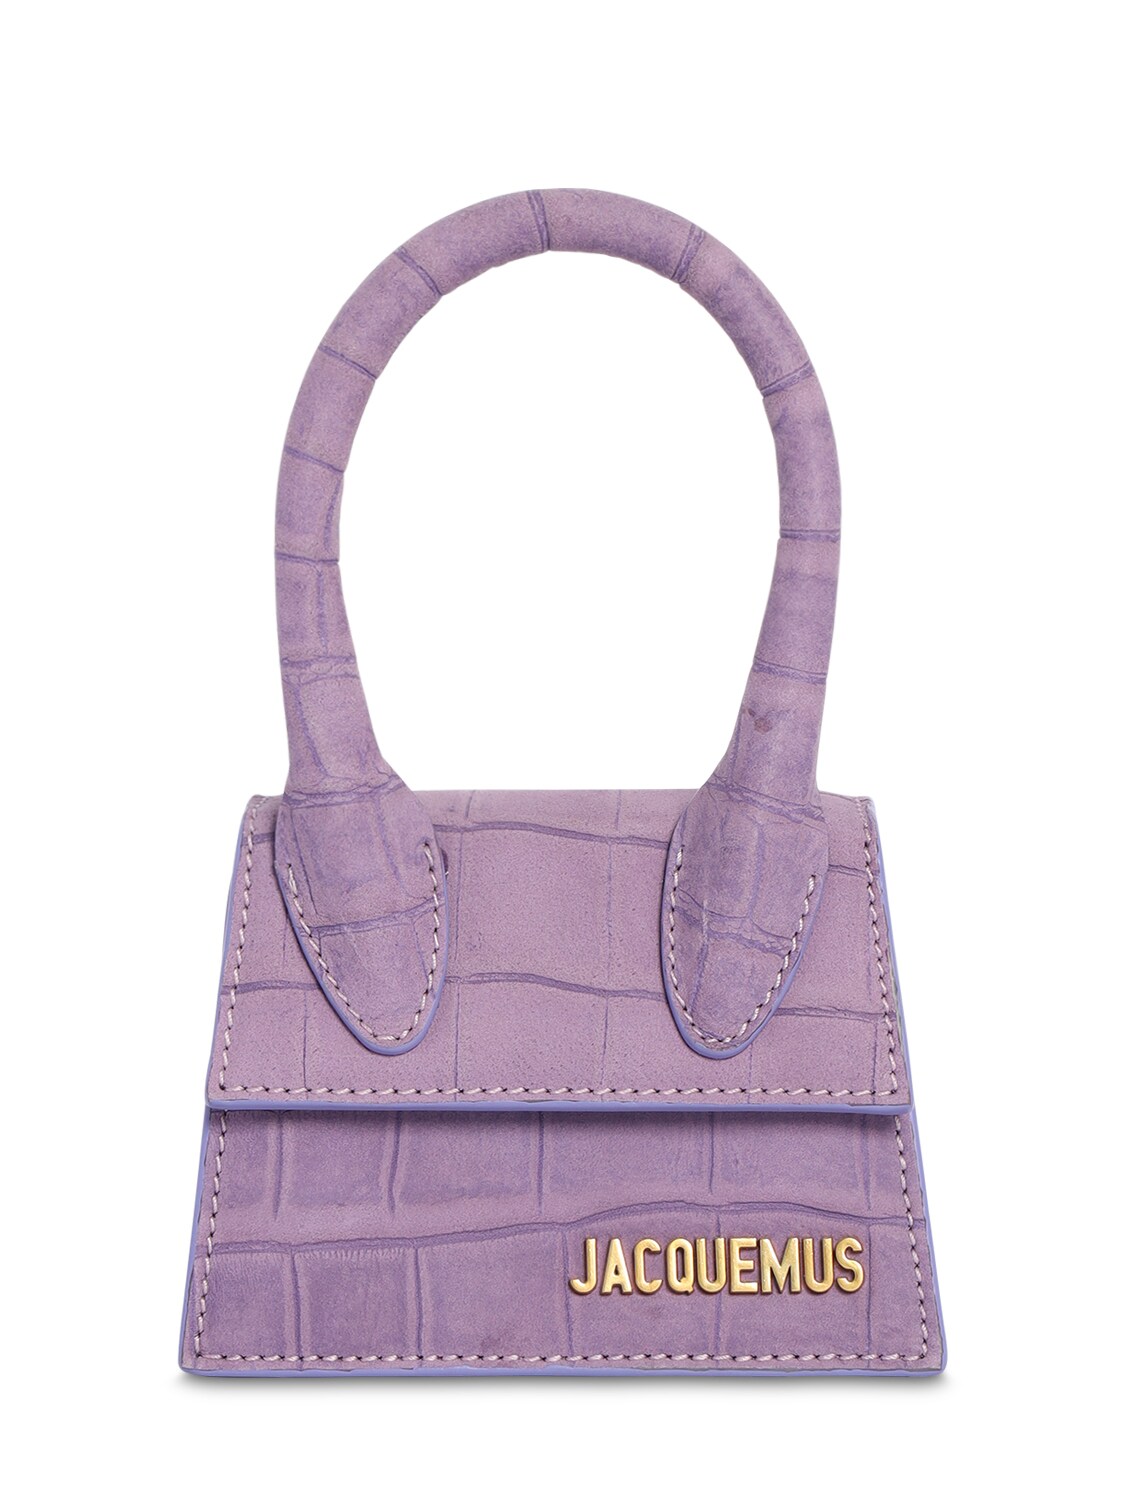 JACQUEMUS LE CHIQUITO CROC EMBOSSED LEATHER BAG,72I5CK059-NJYW0